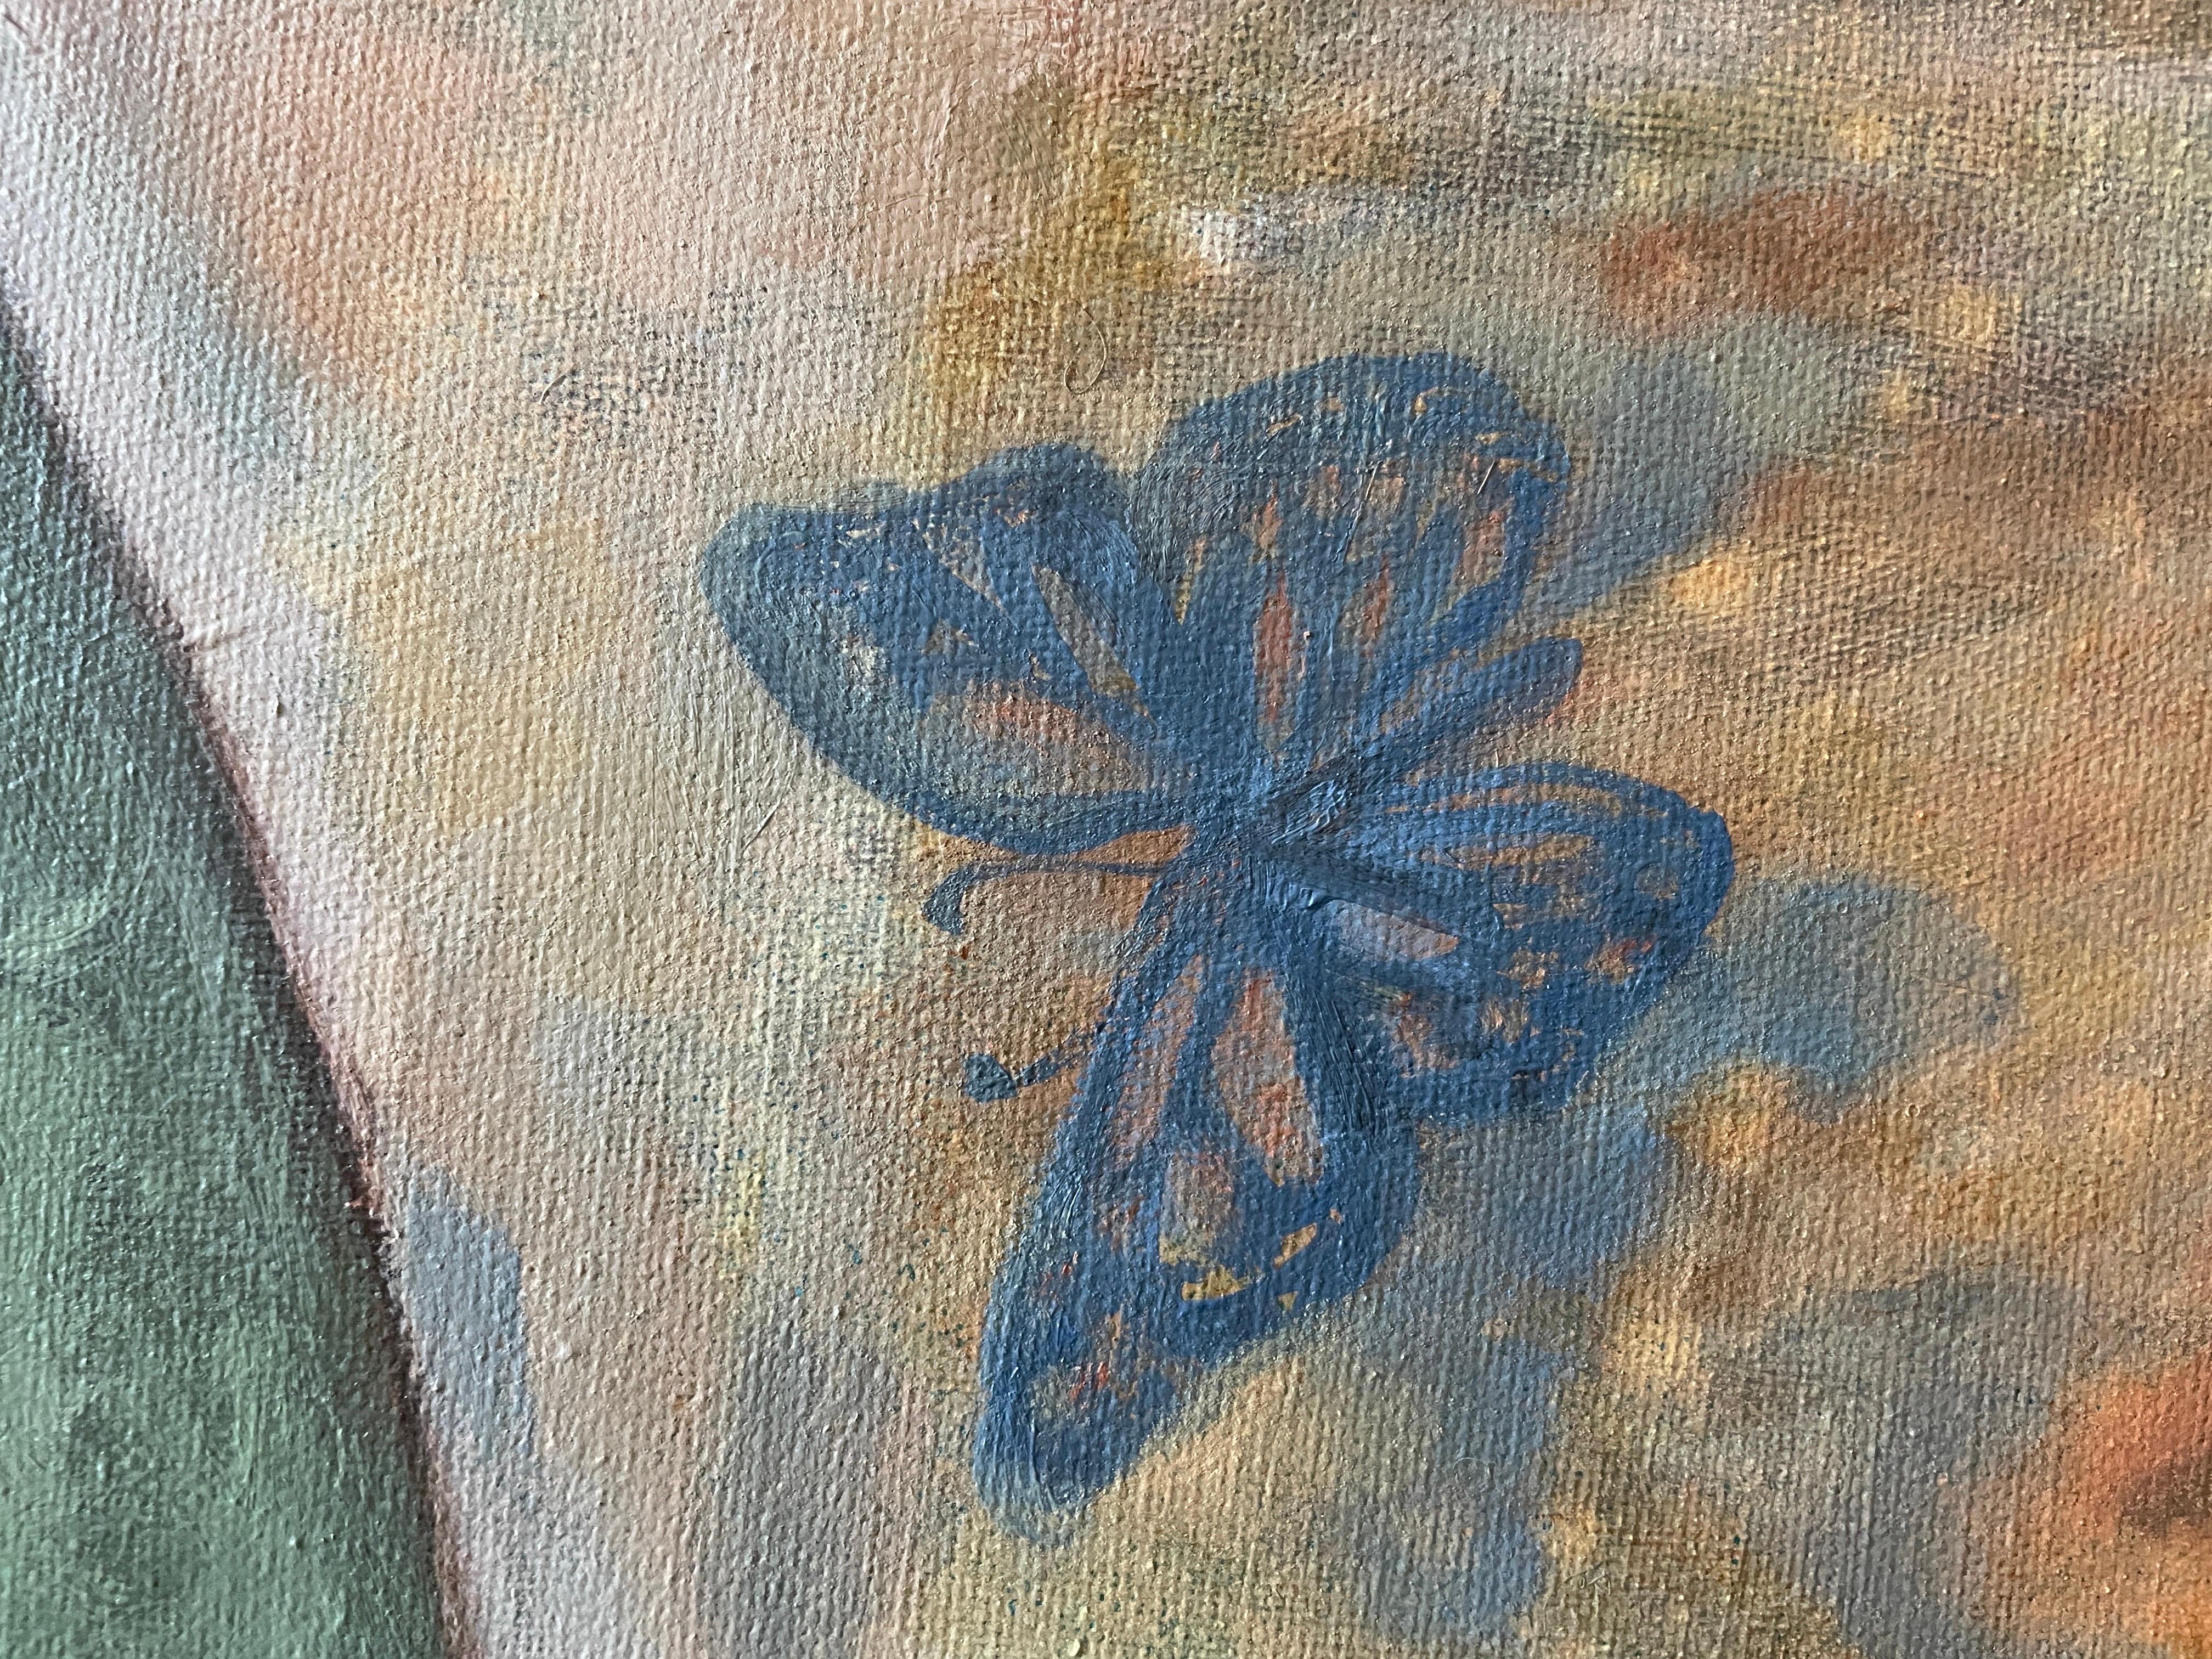 In this acrylic creation, I've explored the delicate interplay of human grace with nature's ethereal beauty. It's a tribute to quiet resilience and transformation, much like the gentle flutter of a butterfly's wings. Each brushstroke carries a